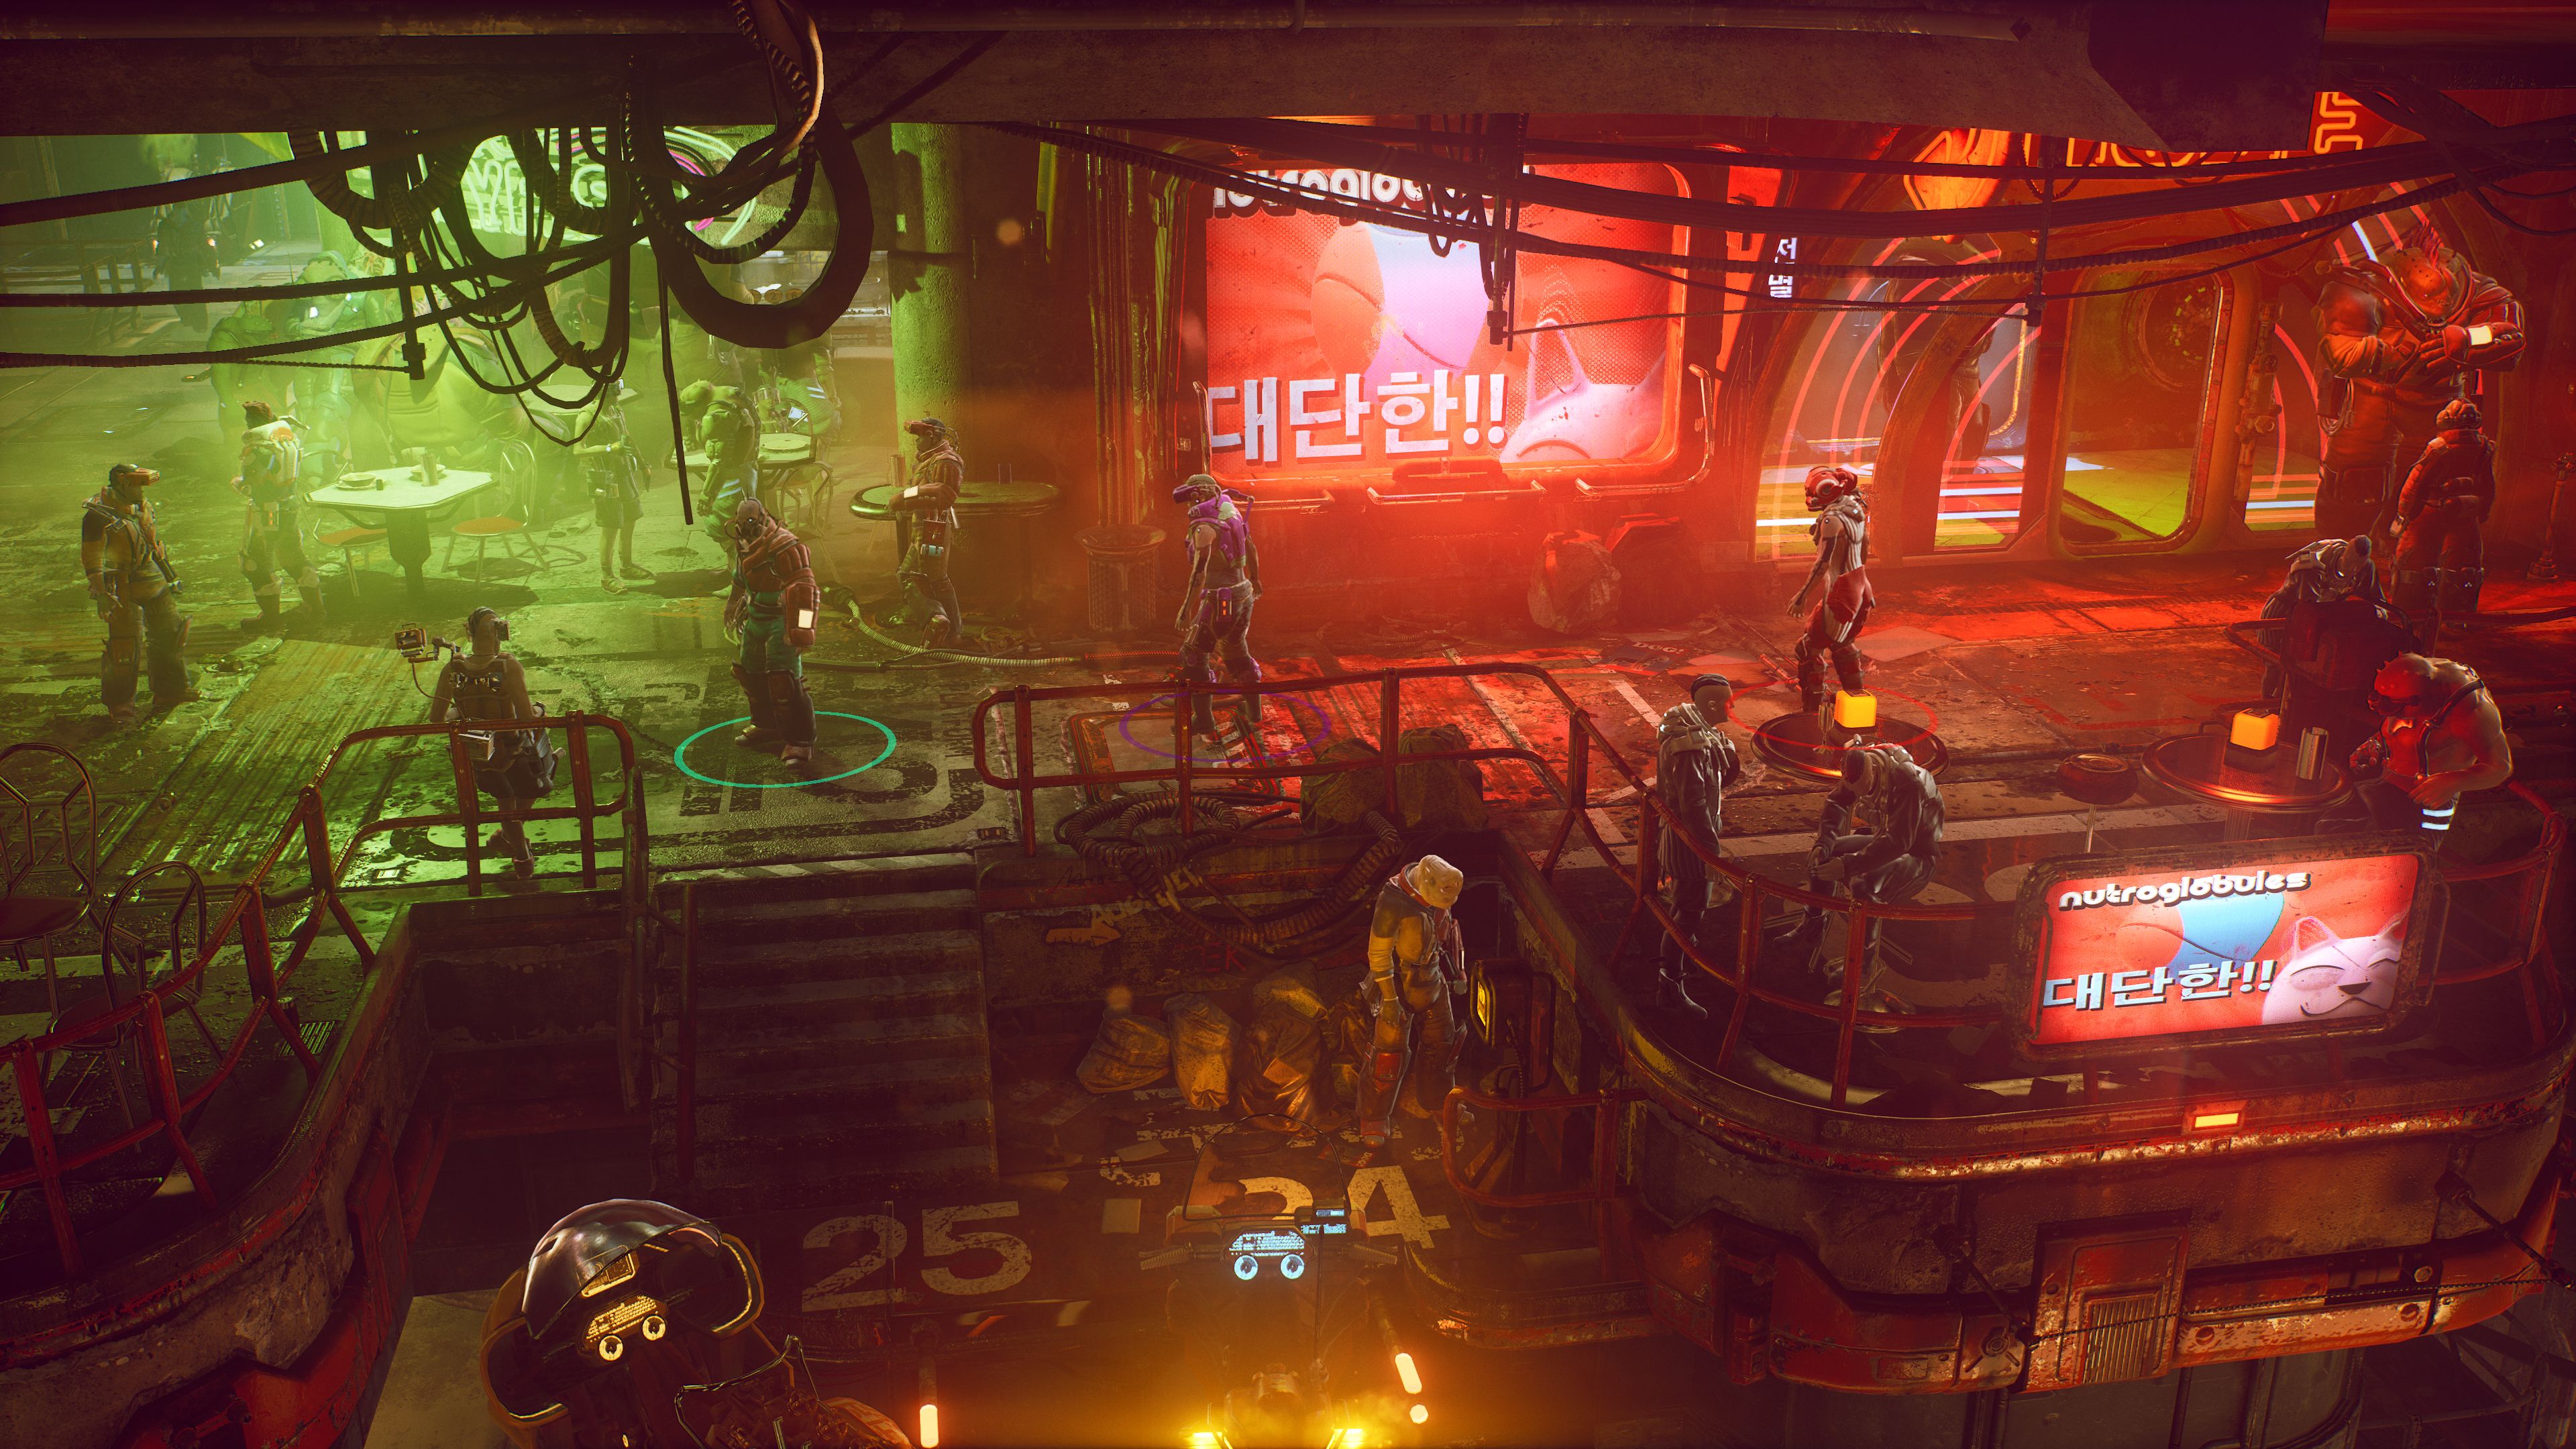 Video game screenshot of characters in a grimy futuristic city